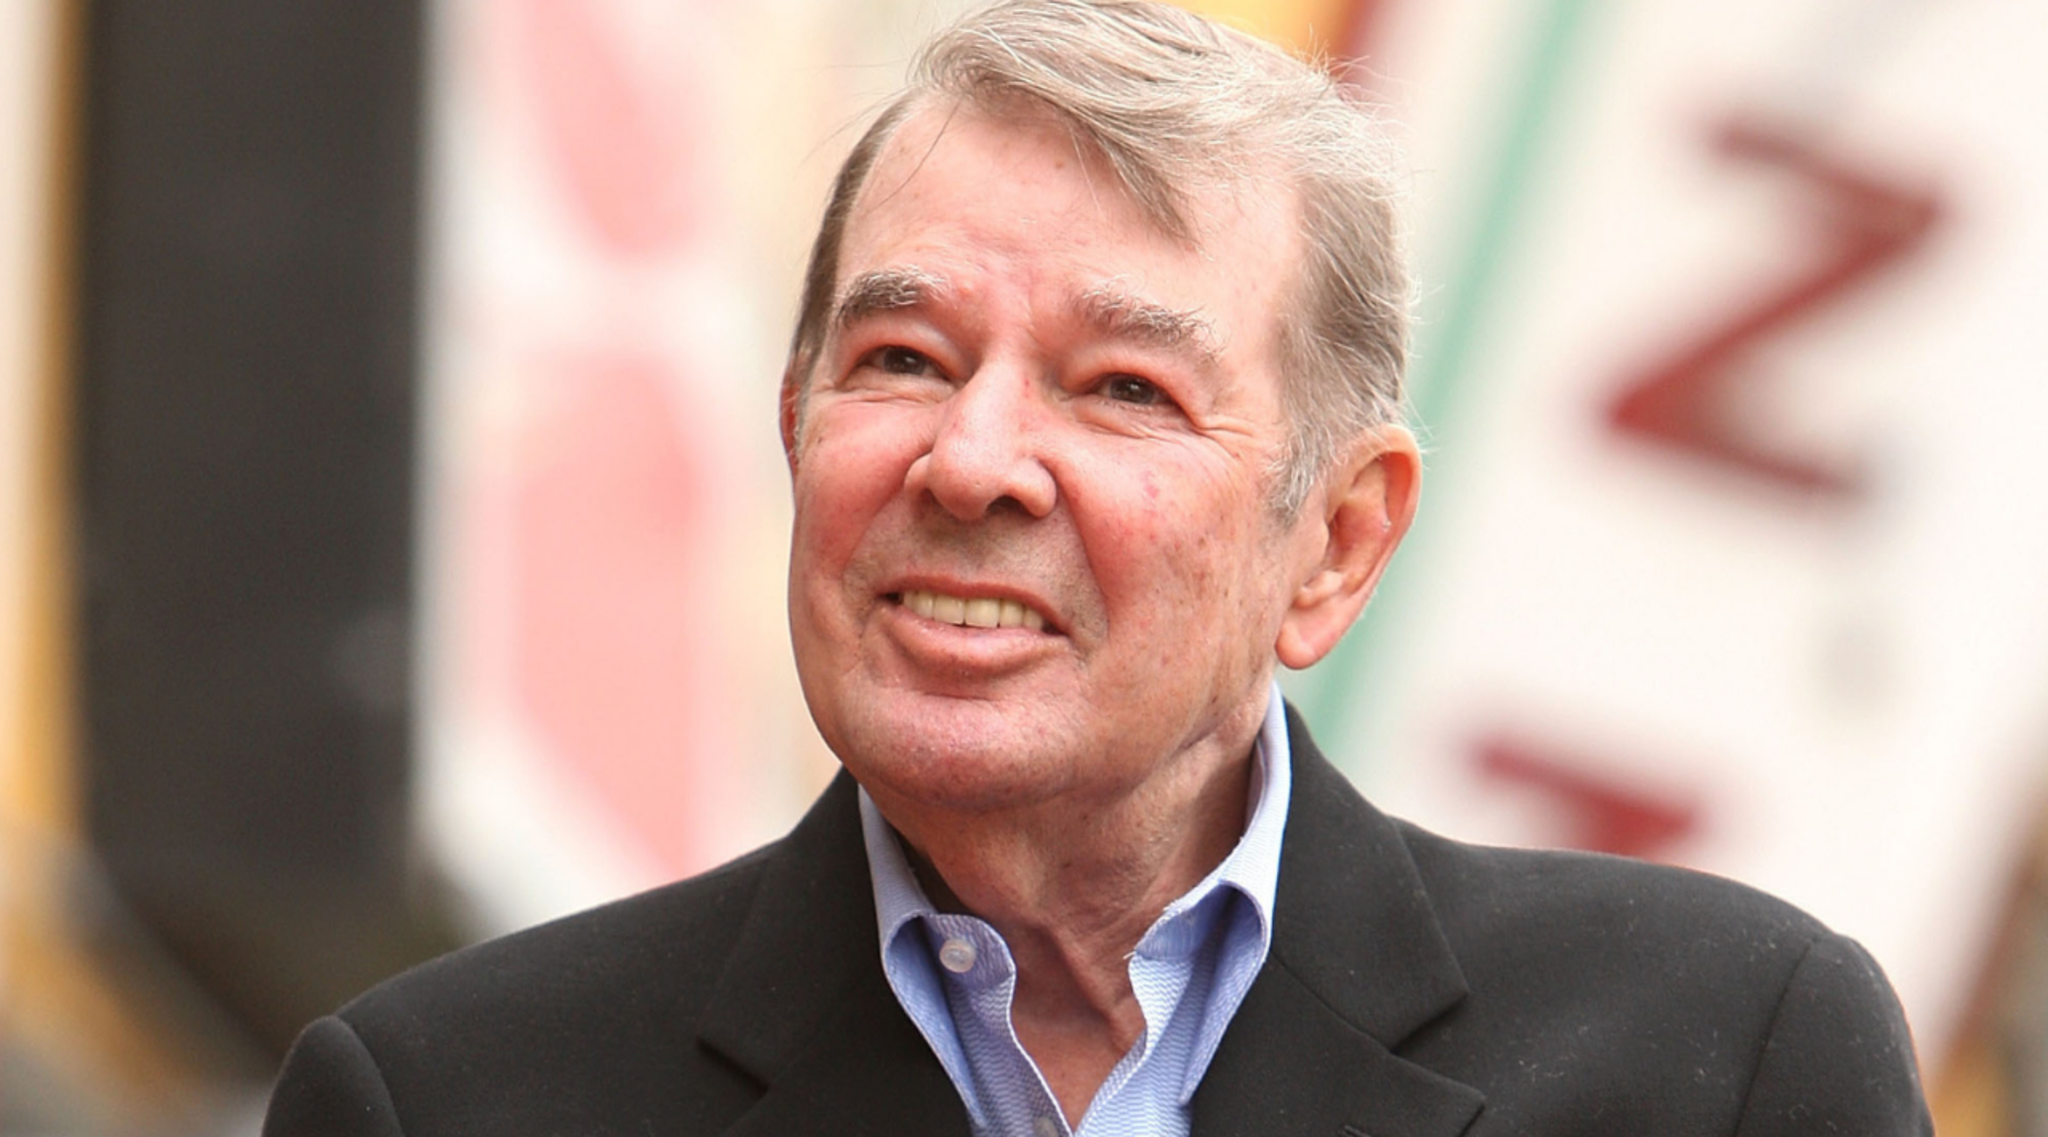 Alan Ladd Jr., Legendary Hollywood Producer and Executive, Dies at 84